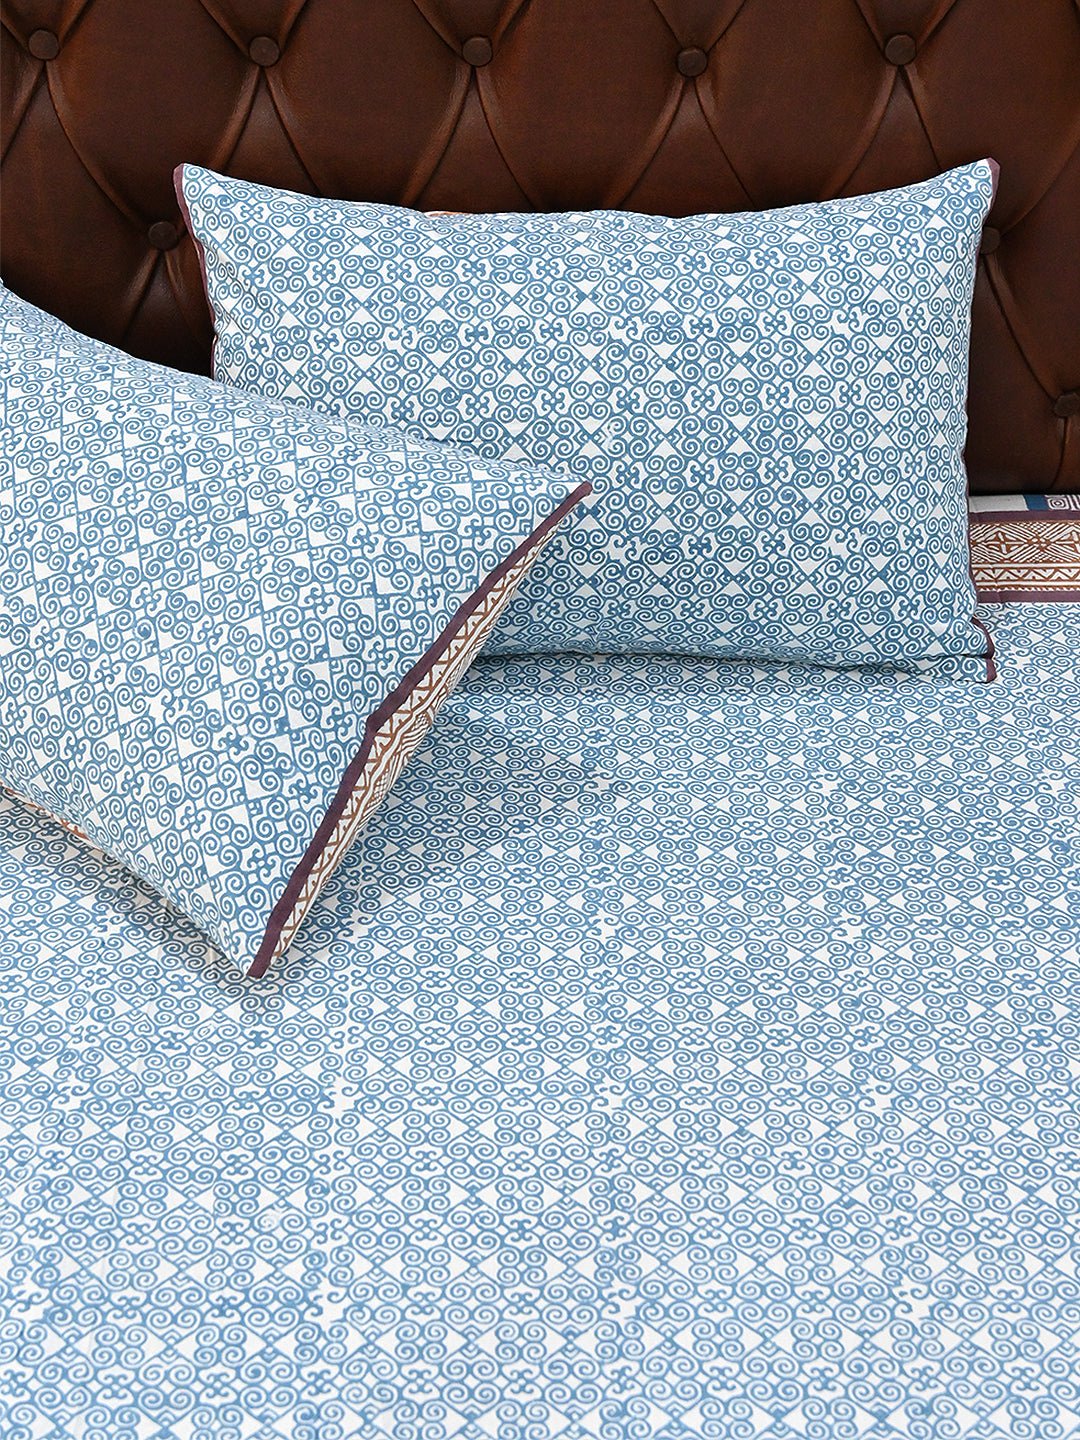 SPIRAL SEA BLUE COTTON BLOCK PRINTED DOUBLE BEDSHEET WITH PILLOW - ART AVENUE